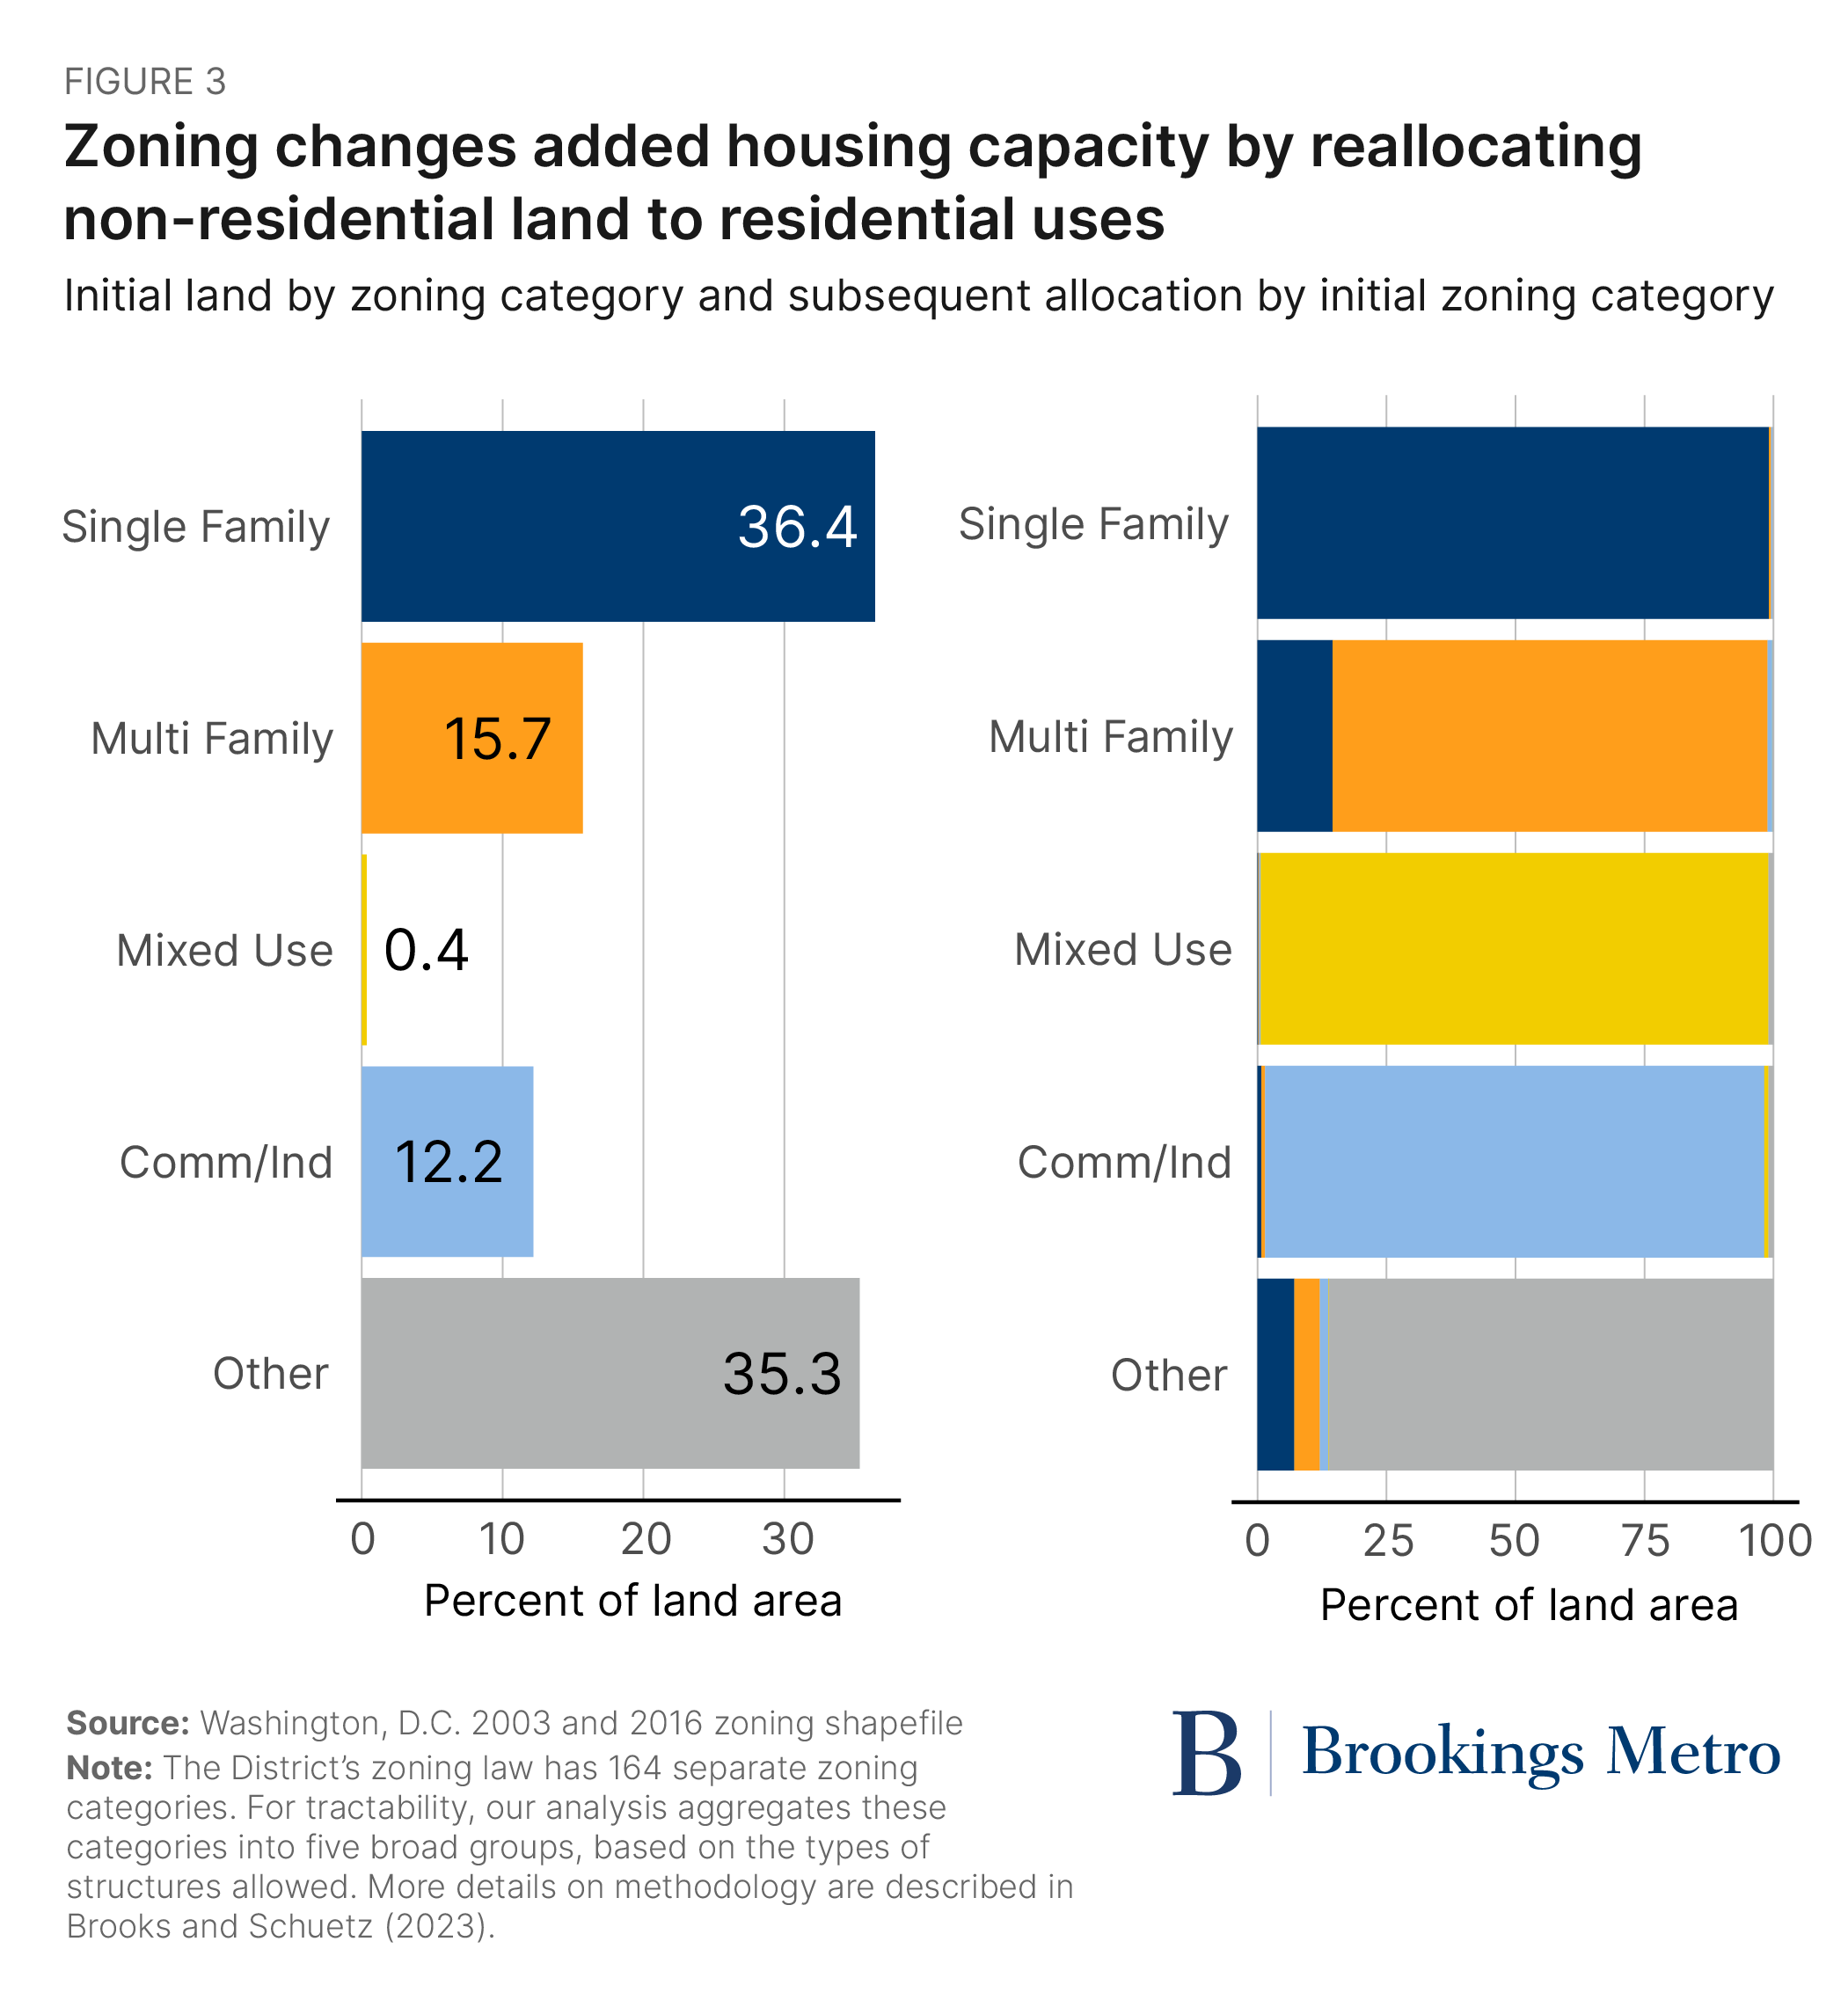 Figure 3. Zoning changes added housing capacity by reallocating non-residential land to residential uses